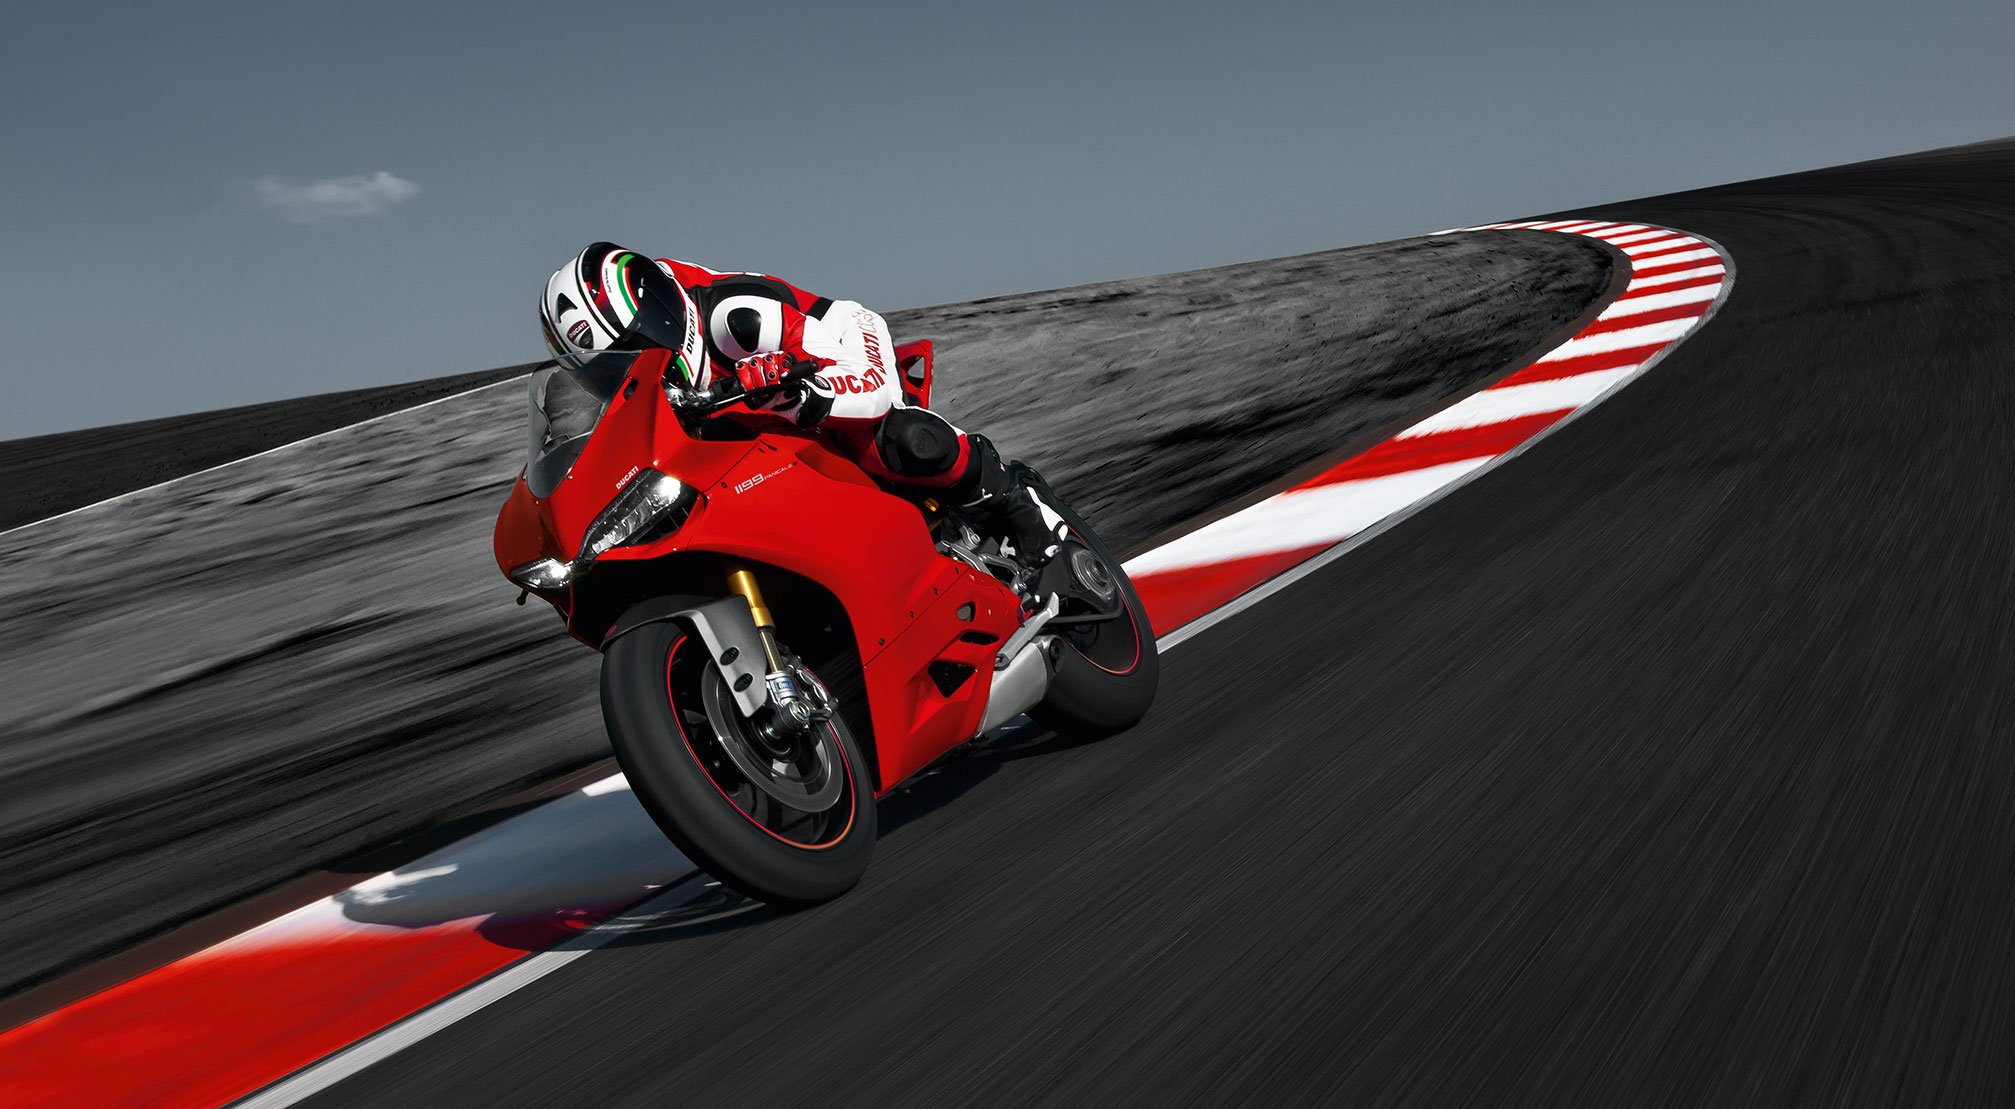 2015 Ducati 1299 Panigale Wallpapers Find best latest 2015x1109